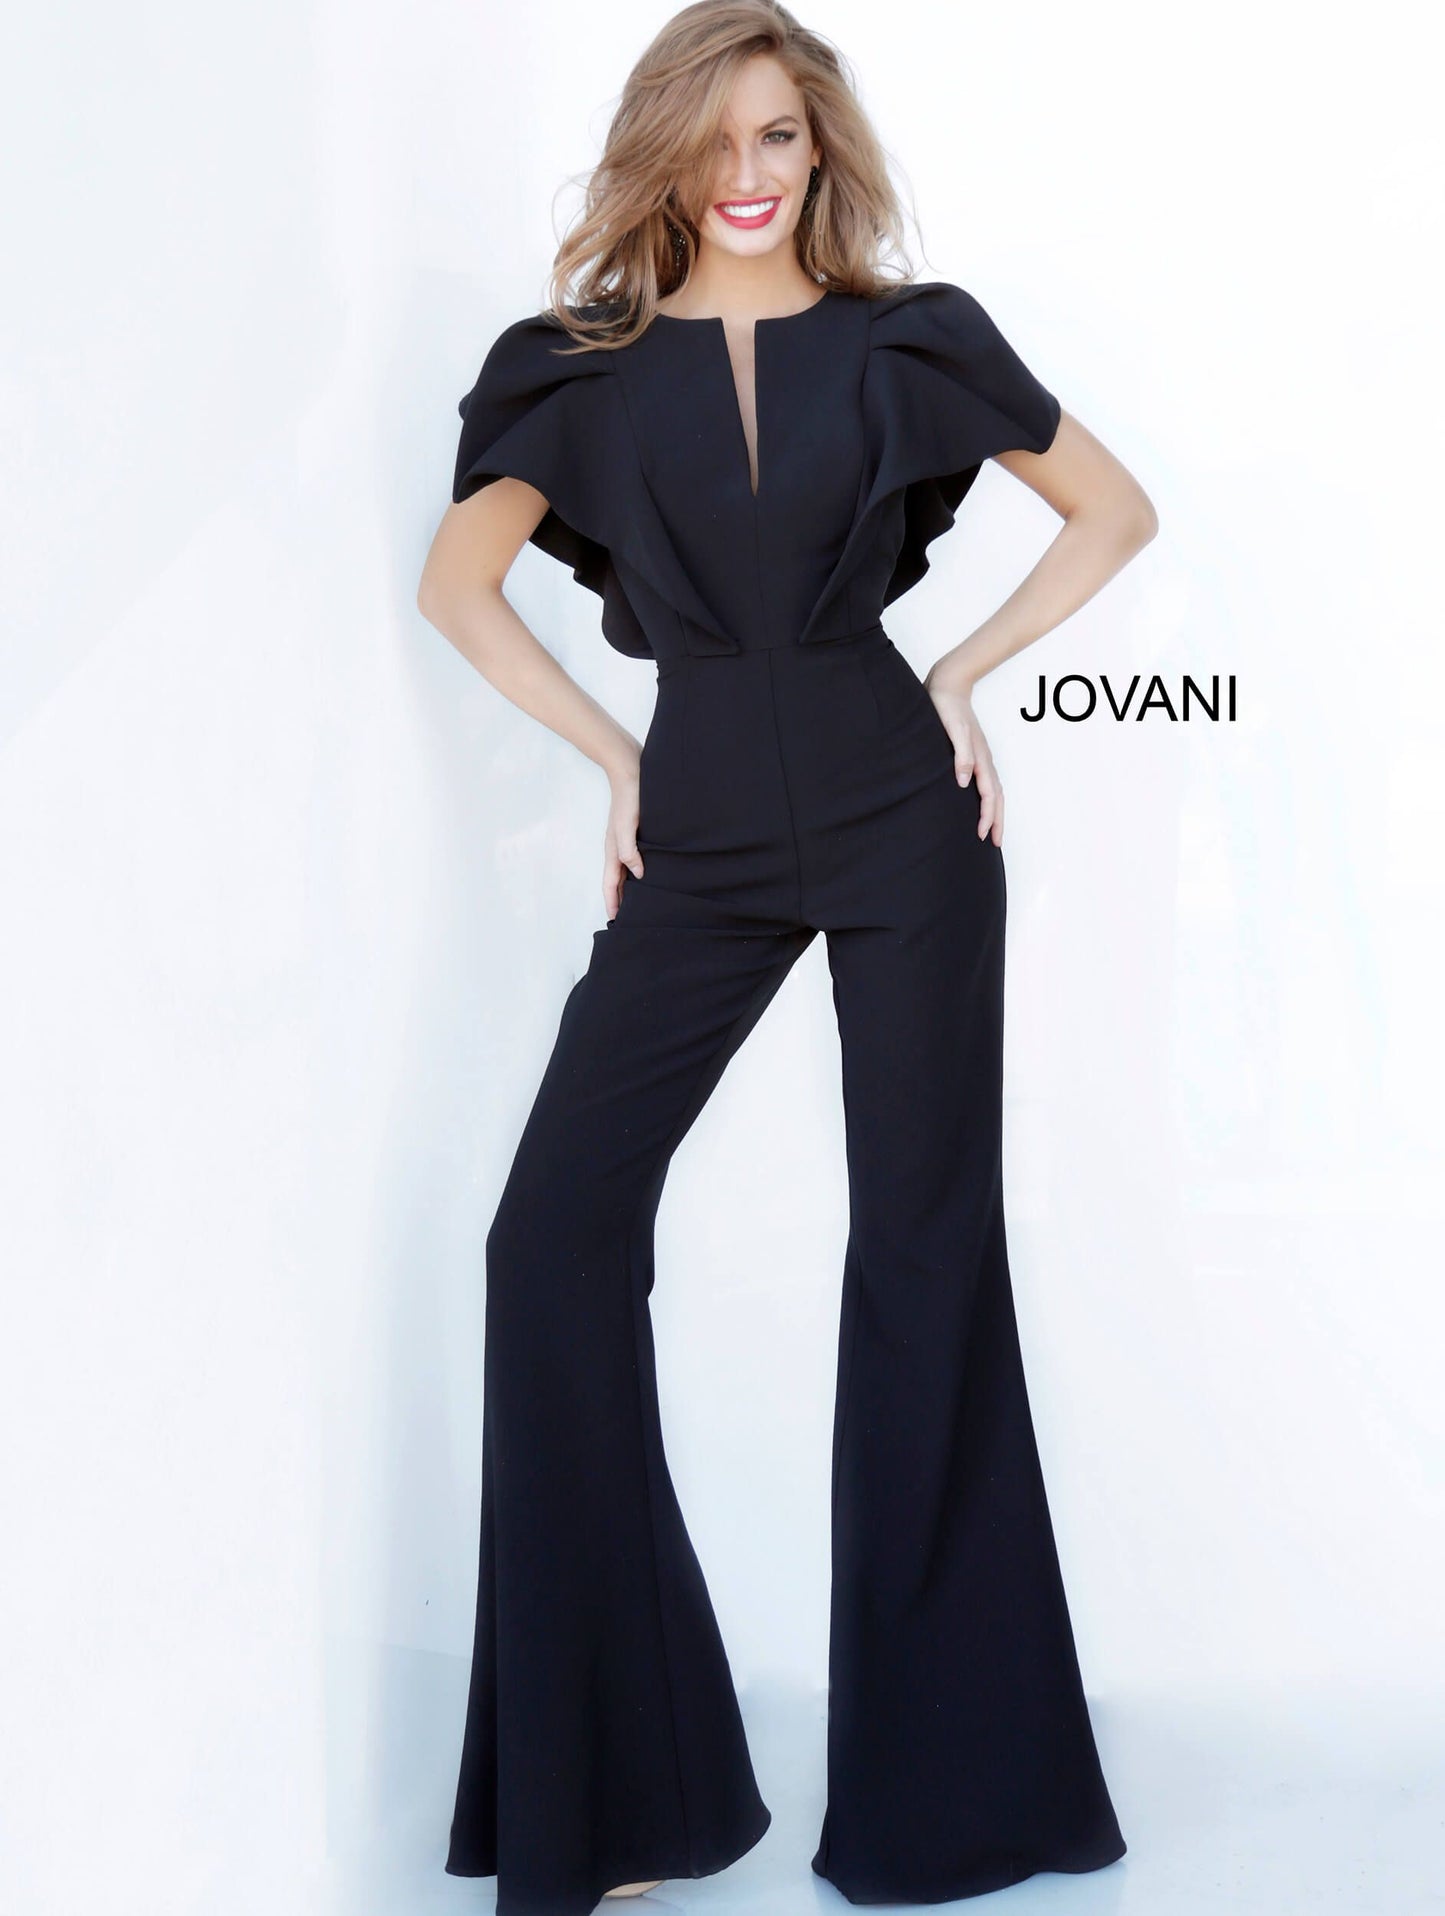 Jovani 00762 ruffle sleeve top with v neckline bell bottoms jumpsuit ruffle top bell bottoms jumpsuit Pageant Skinny V Neck Suit Couture  Available colors:  Black, Fuchsia, Ivory, Navy, Red, Tangerine, Turquoise  Available sizes:  00-24 